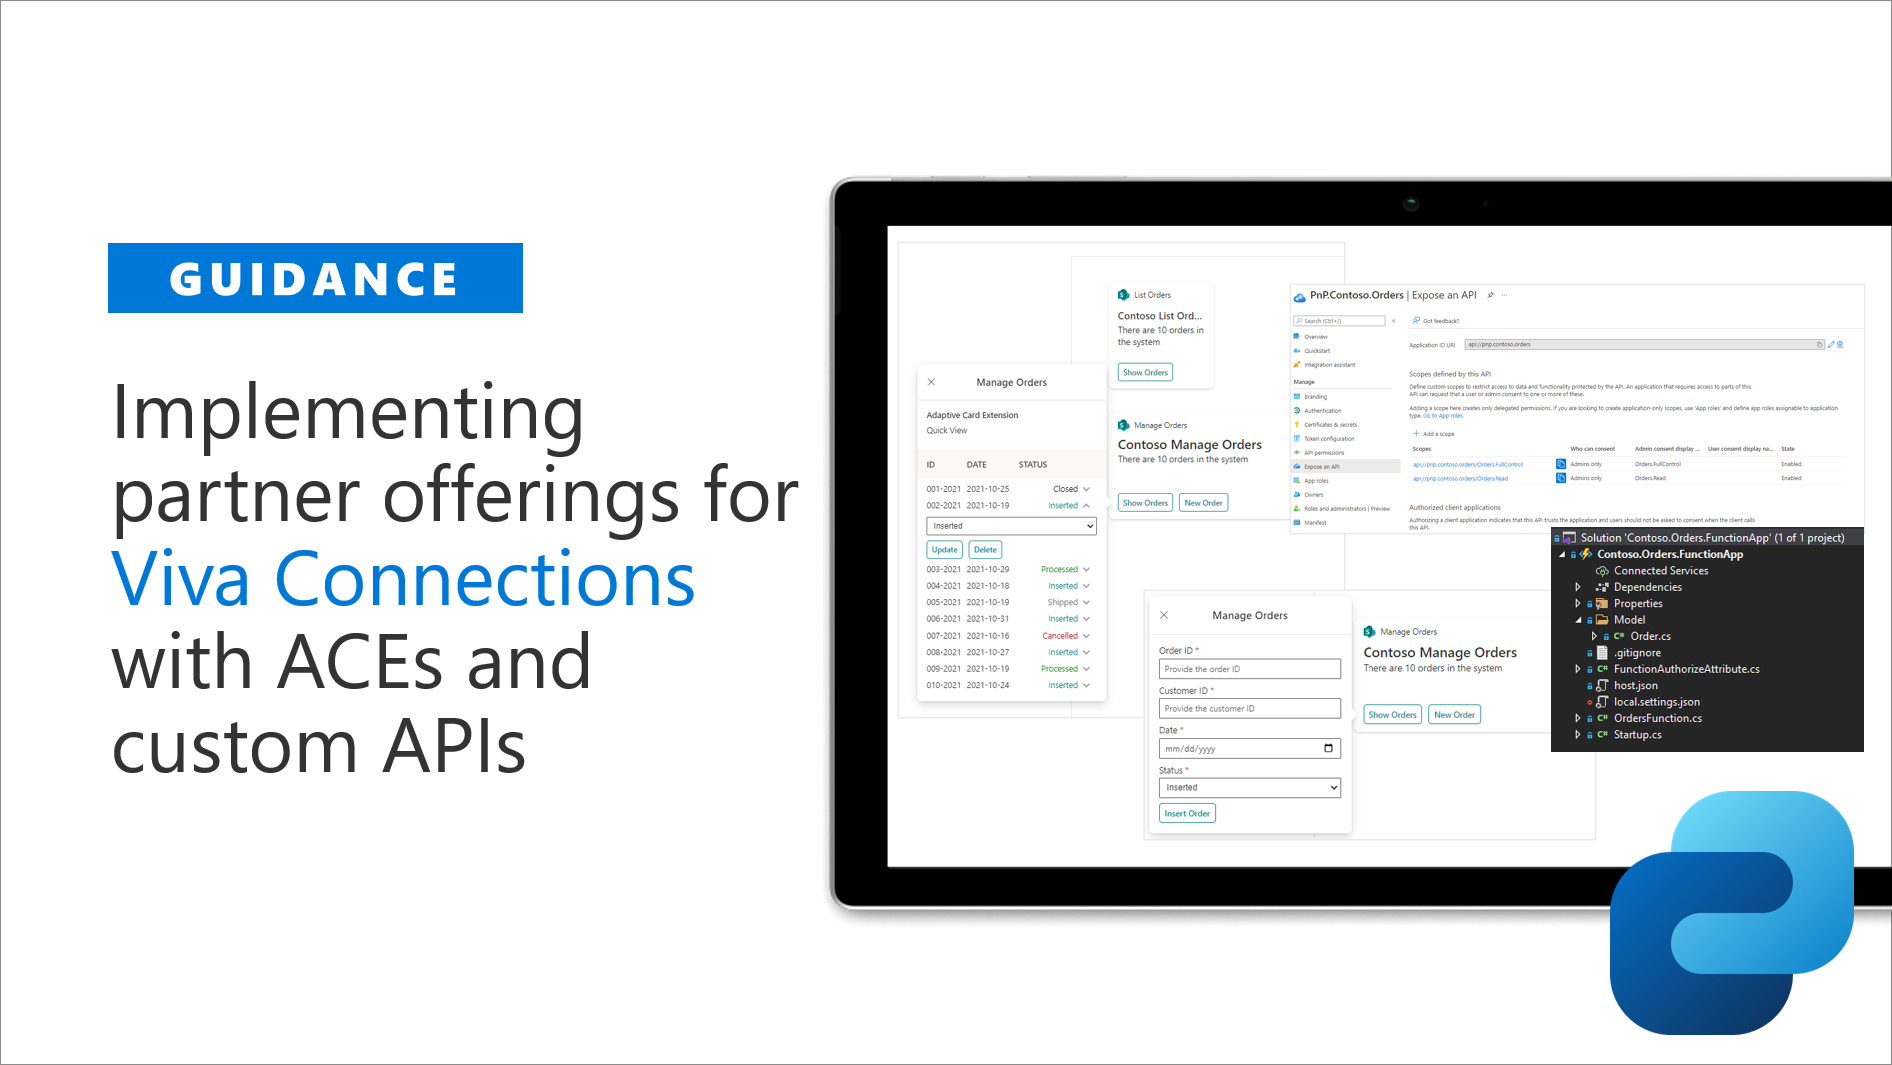 Guidance for implementing partner offerings for Viva Connections with ACEs and custom APIs